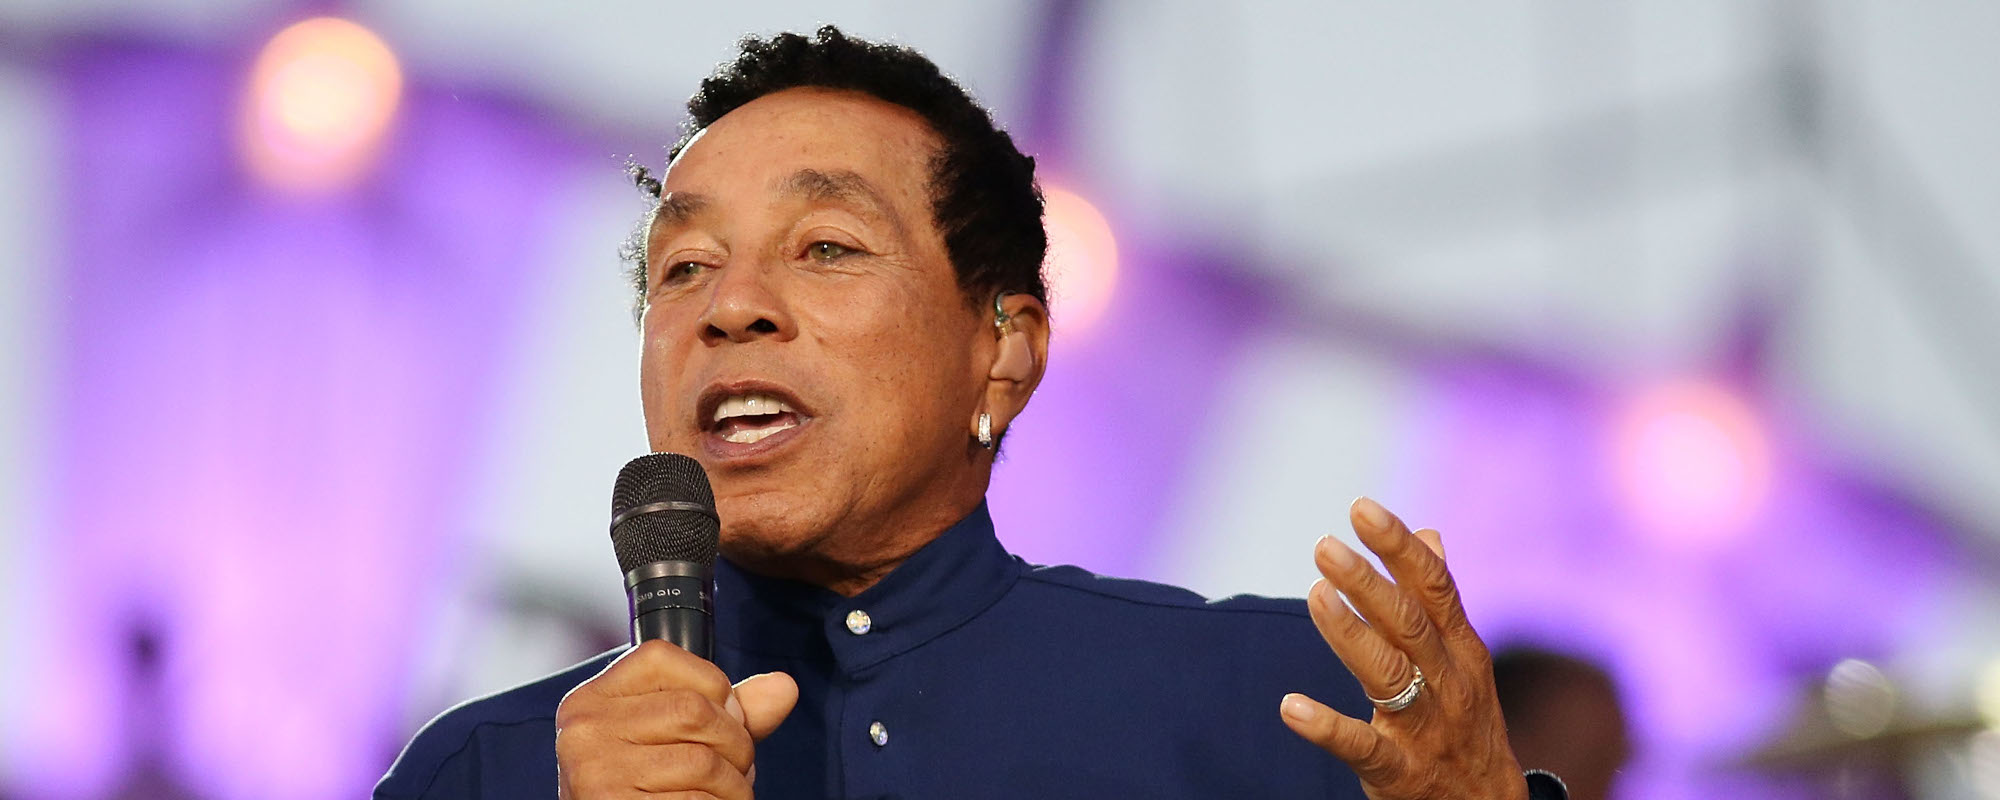 The Story Behind “Being with You” by Smokey Robinson and the Ironic Circumstance that Kept It from Being a No. 1 Hit in the U.S.